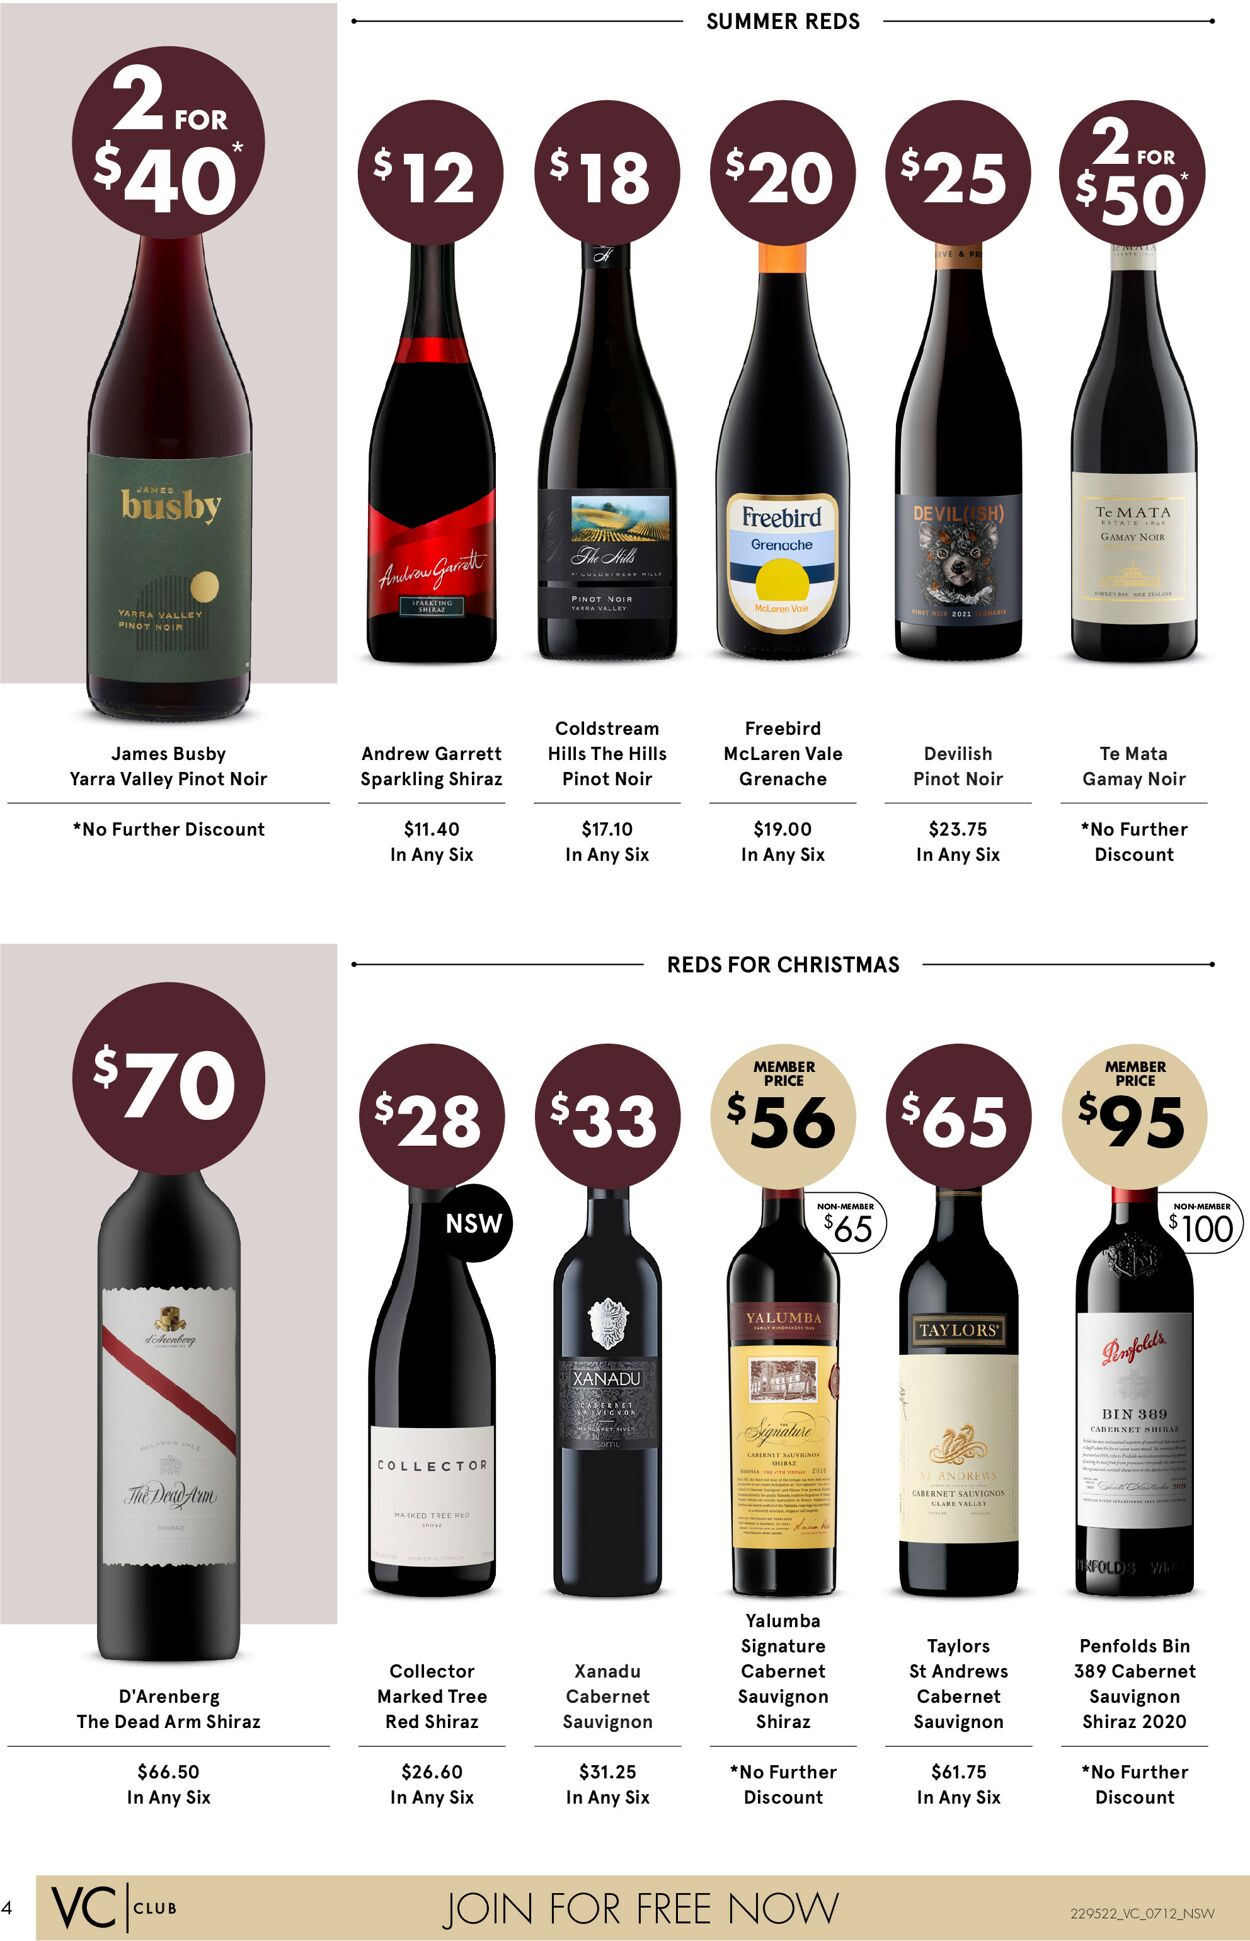 Vintage Cellars Catalogue from 08/12/2022